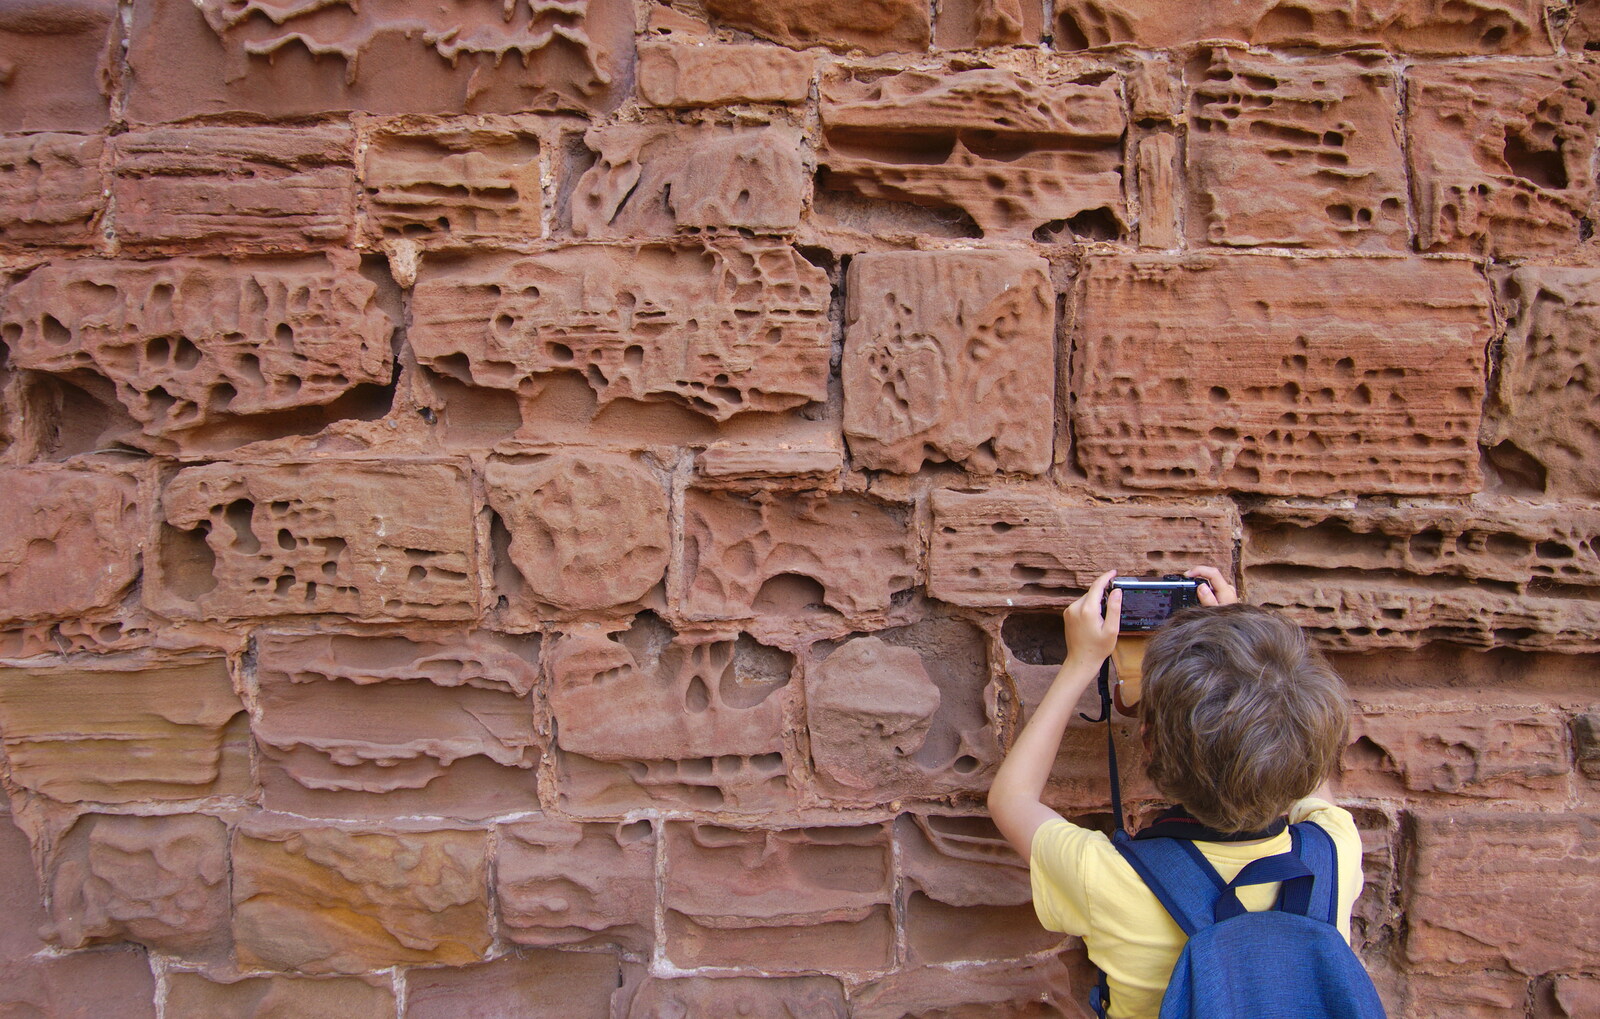 Fred inspects some awesome sanstone erosion from Kenilworth Castle and the 69th Entry Reunion Dinner, Stratford, Warwickshire - 14th September 2019